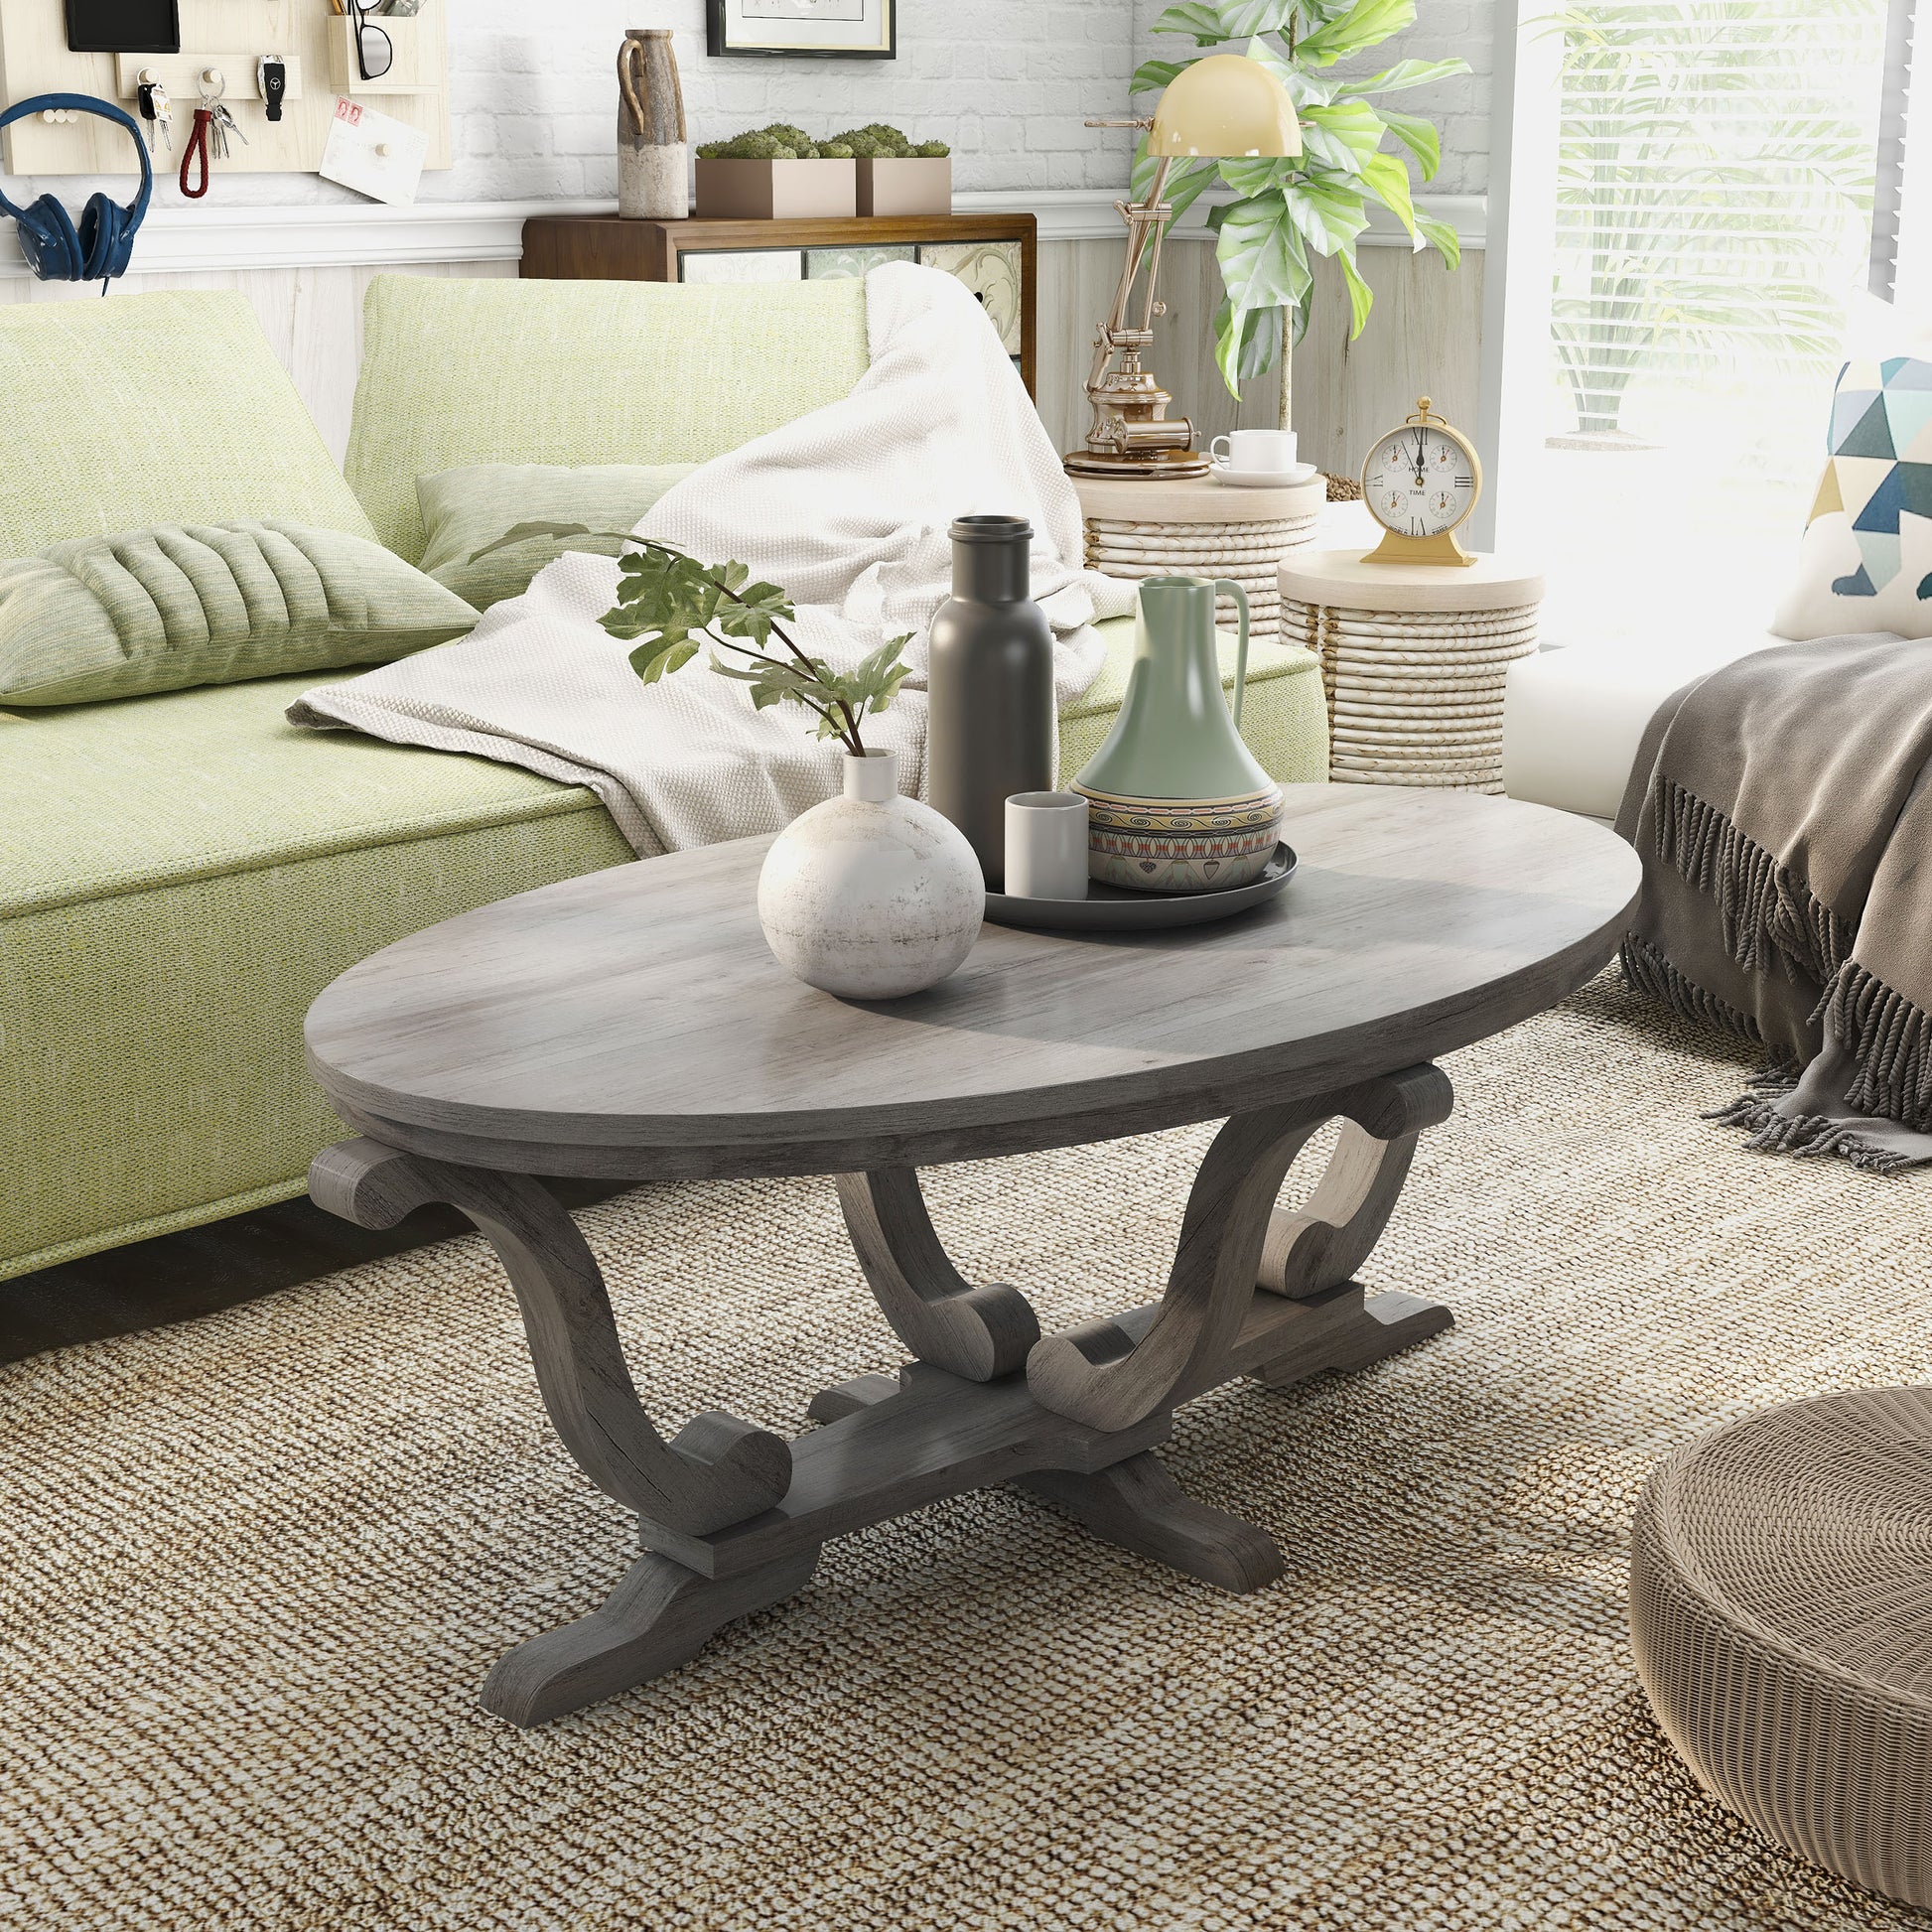 Right angled farmhouse vintage gray oak curved pedestal coffee table in a living room with accessories